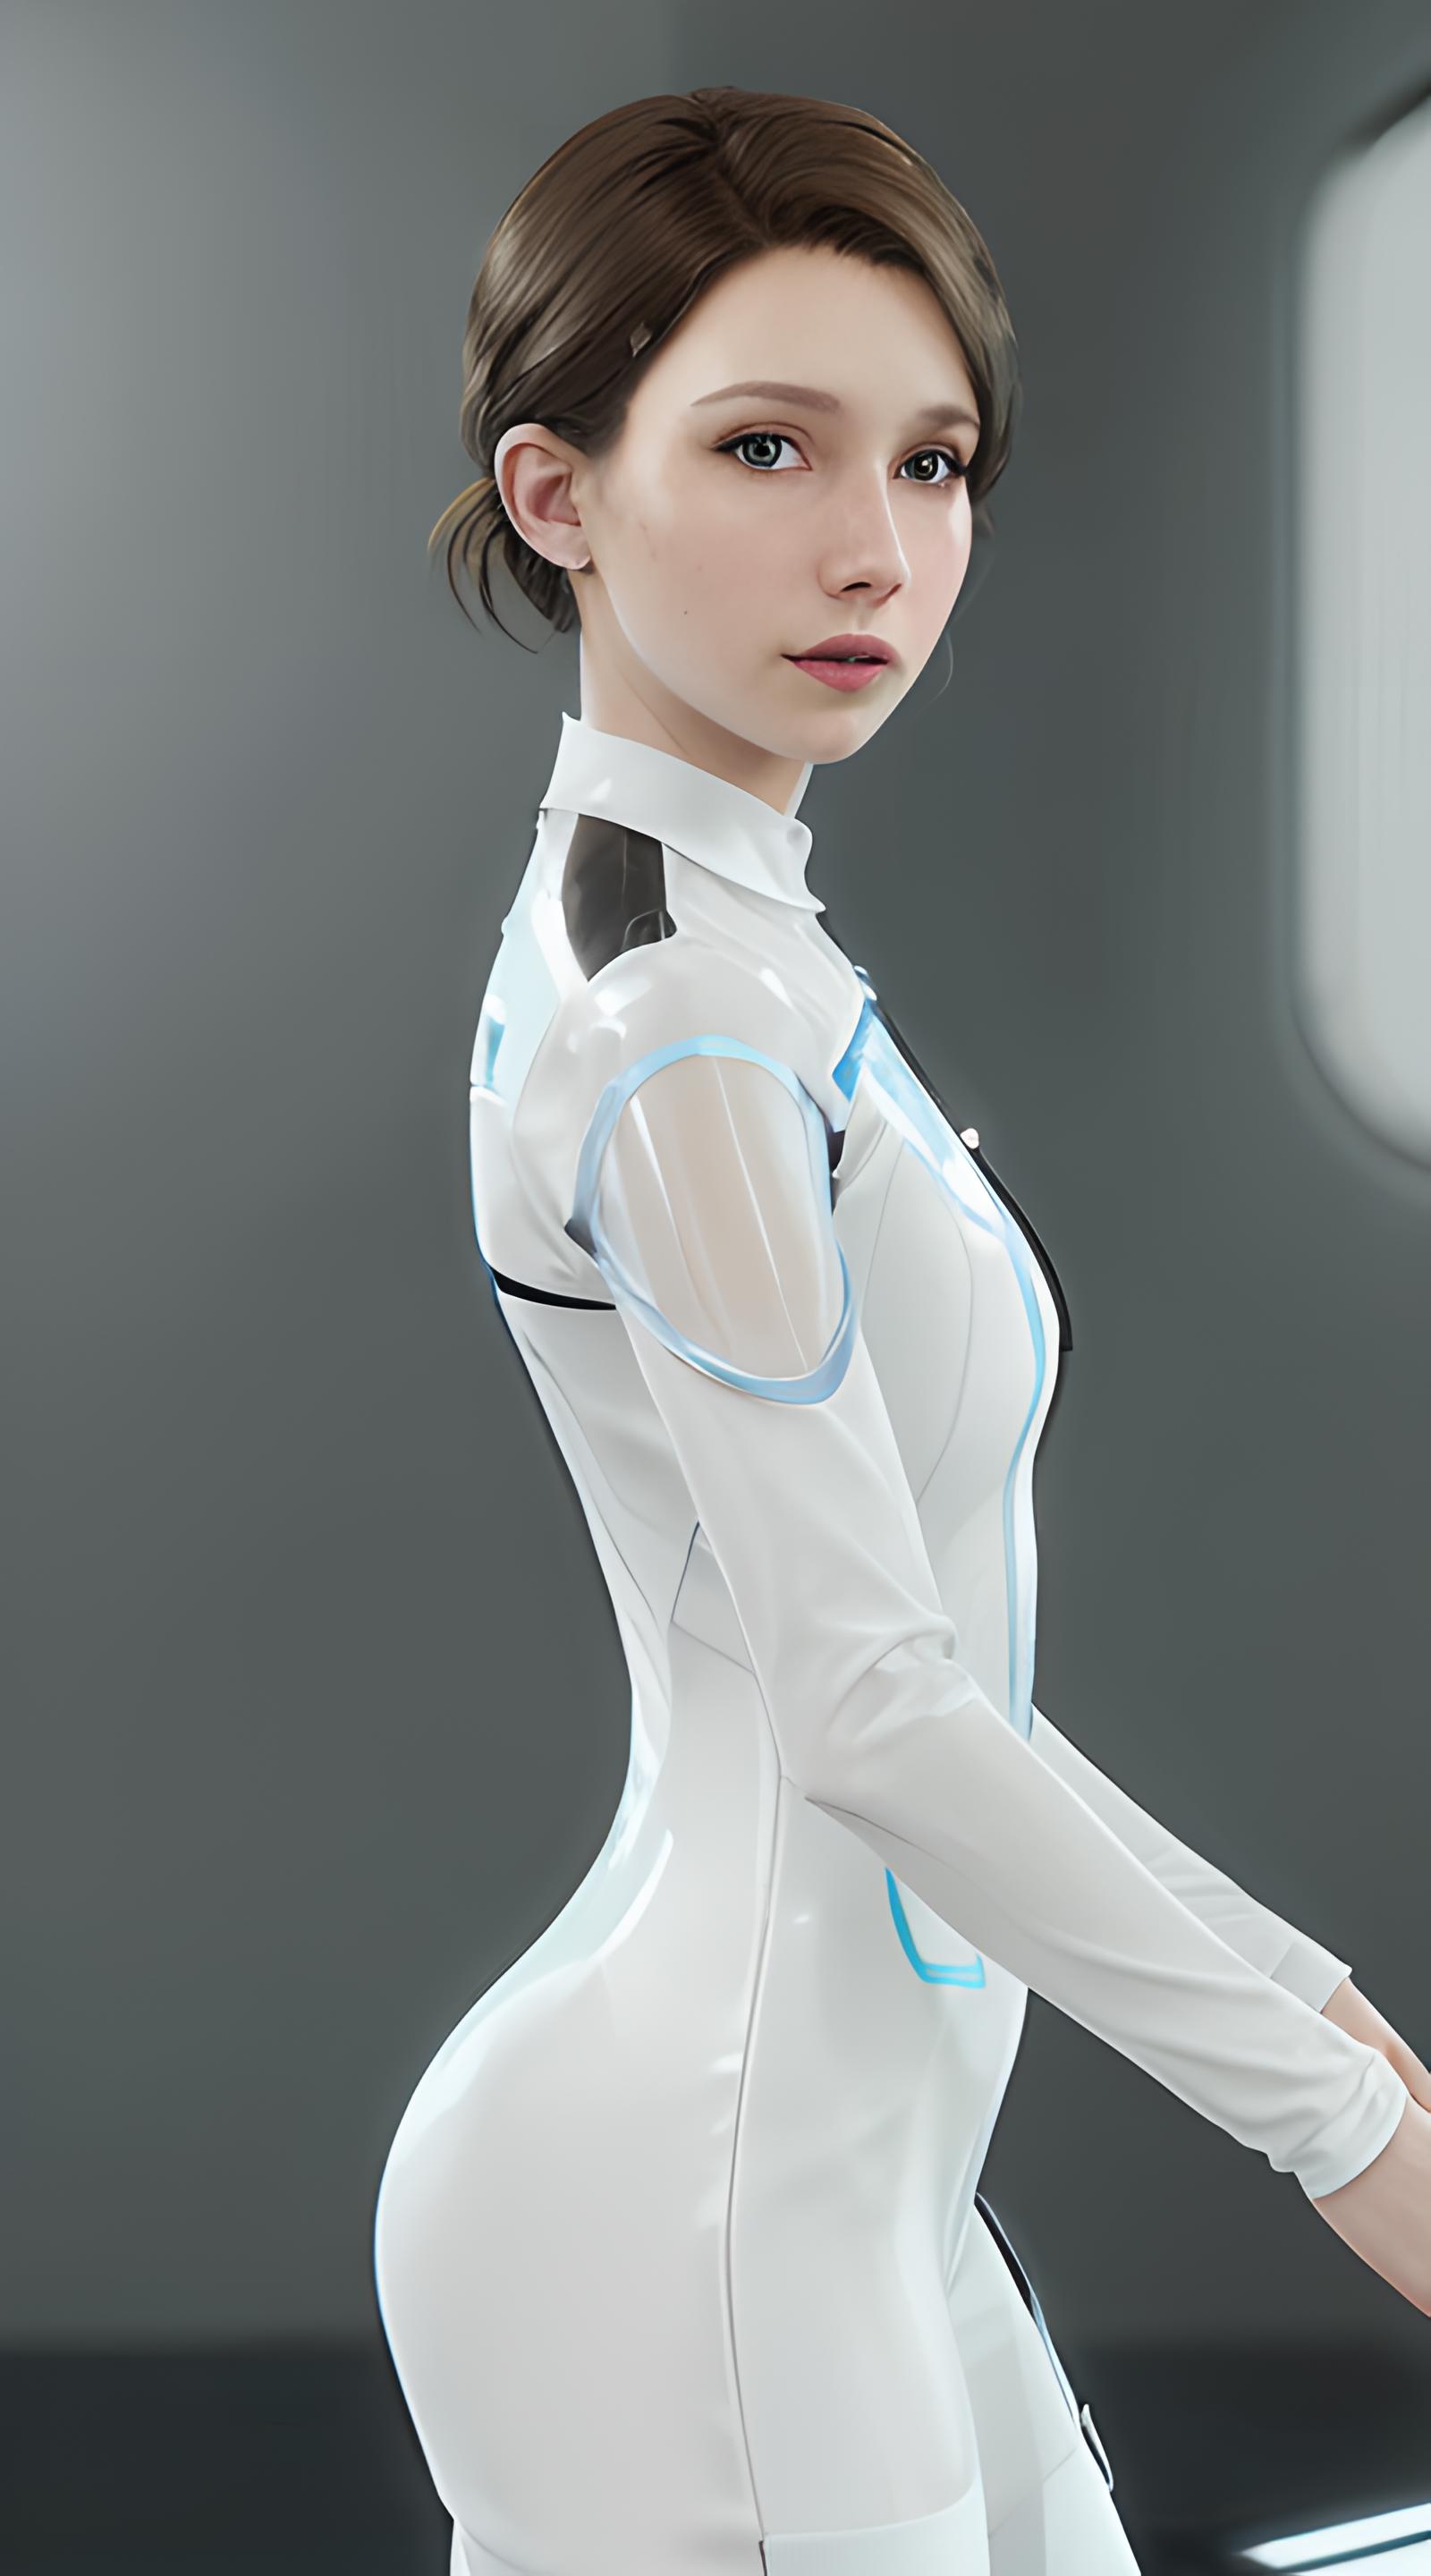 AI model image by kaskuo1017